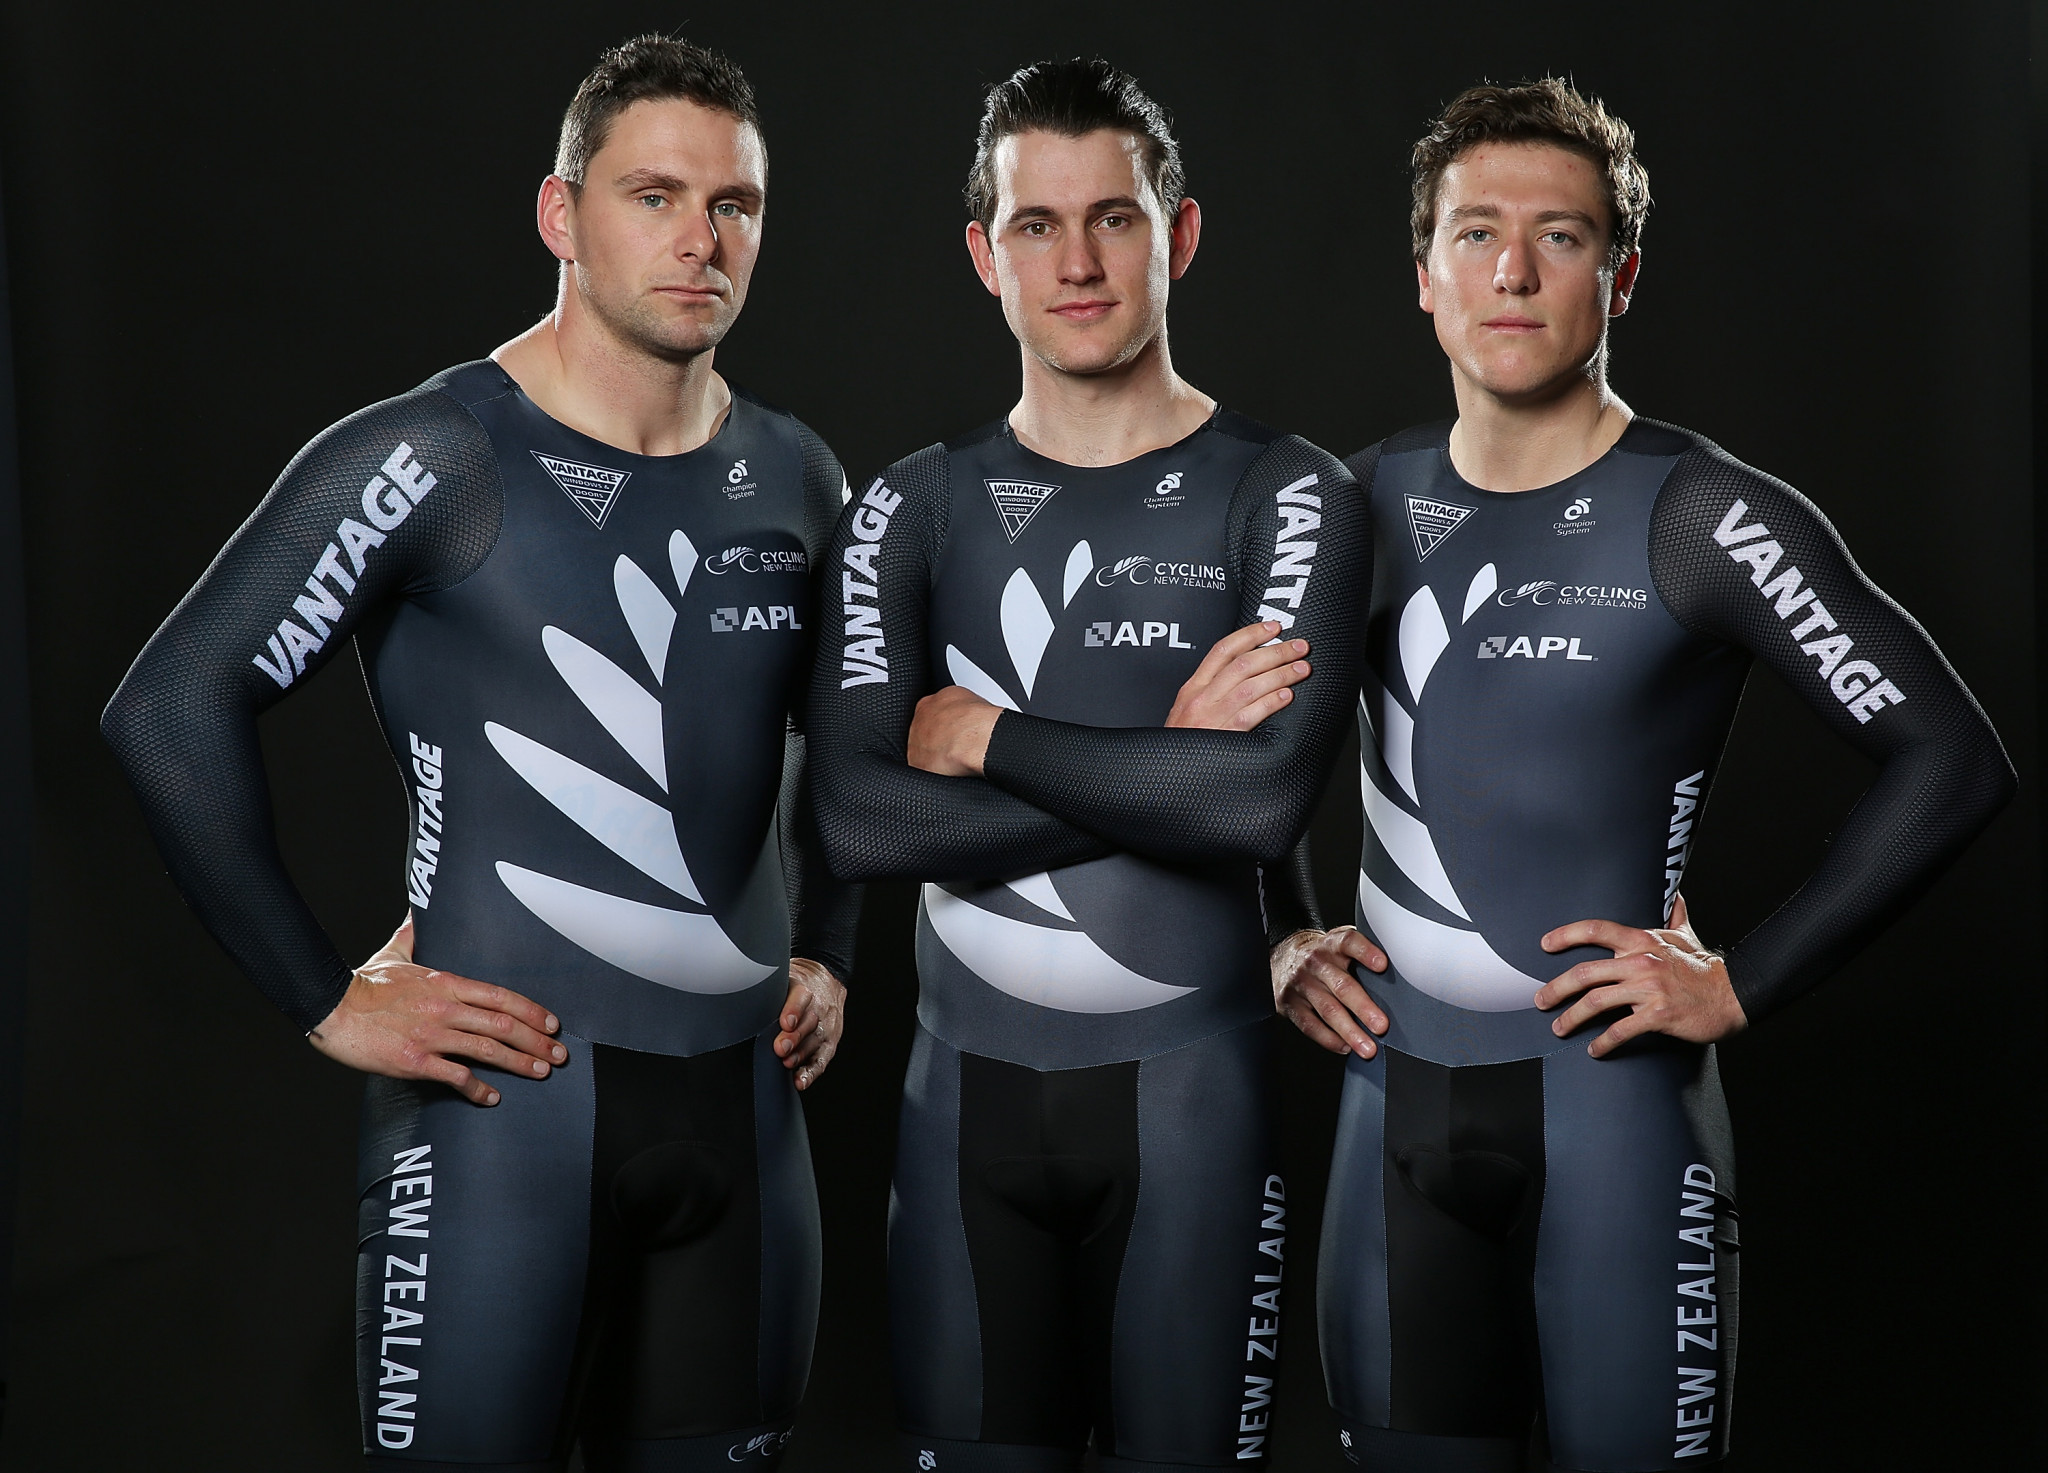 New Zealand will hope to defend their men's team sprint title at the Games ©Getty Images